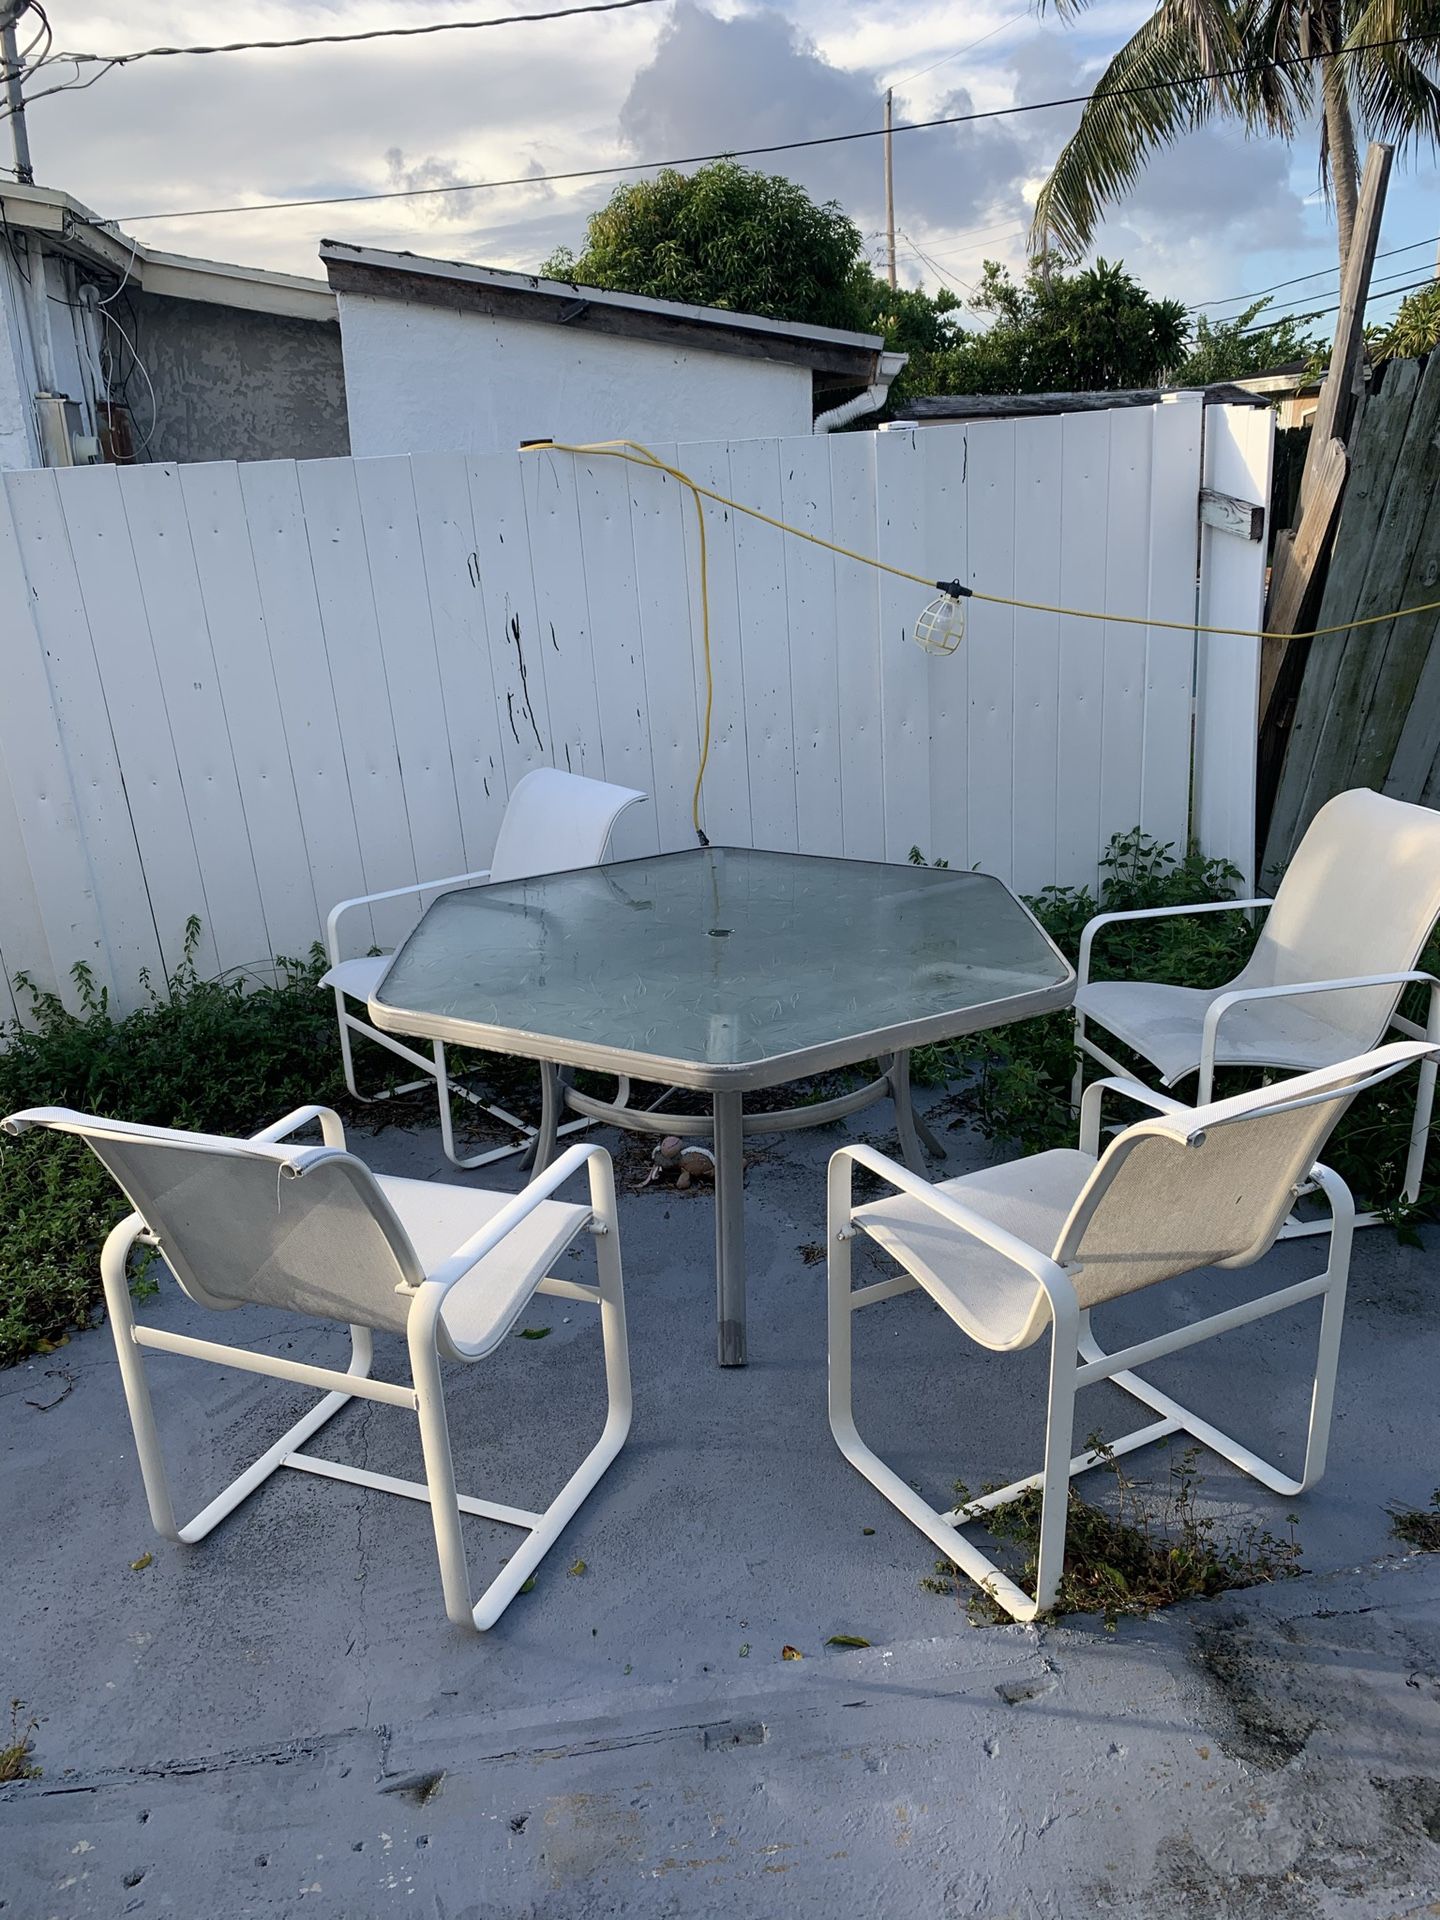 Outdoor patio furniture for sale